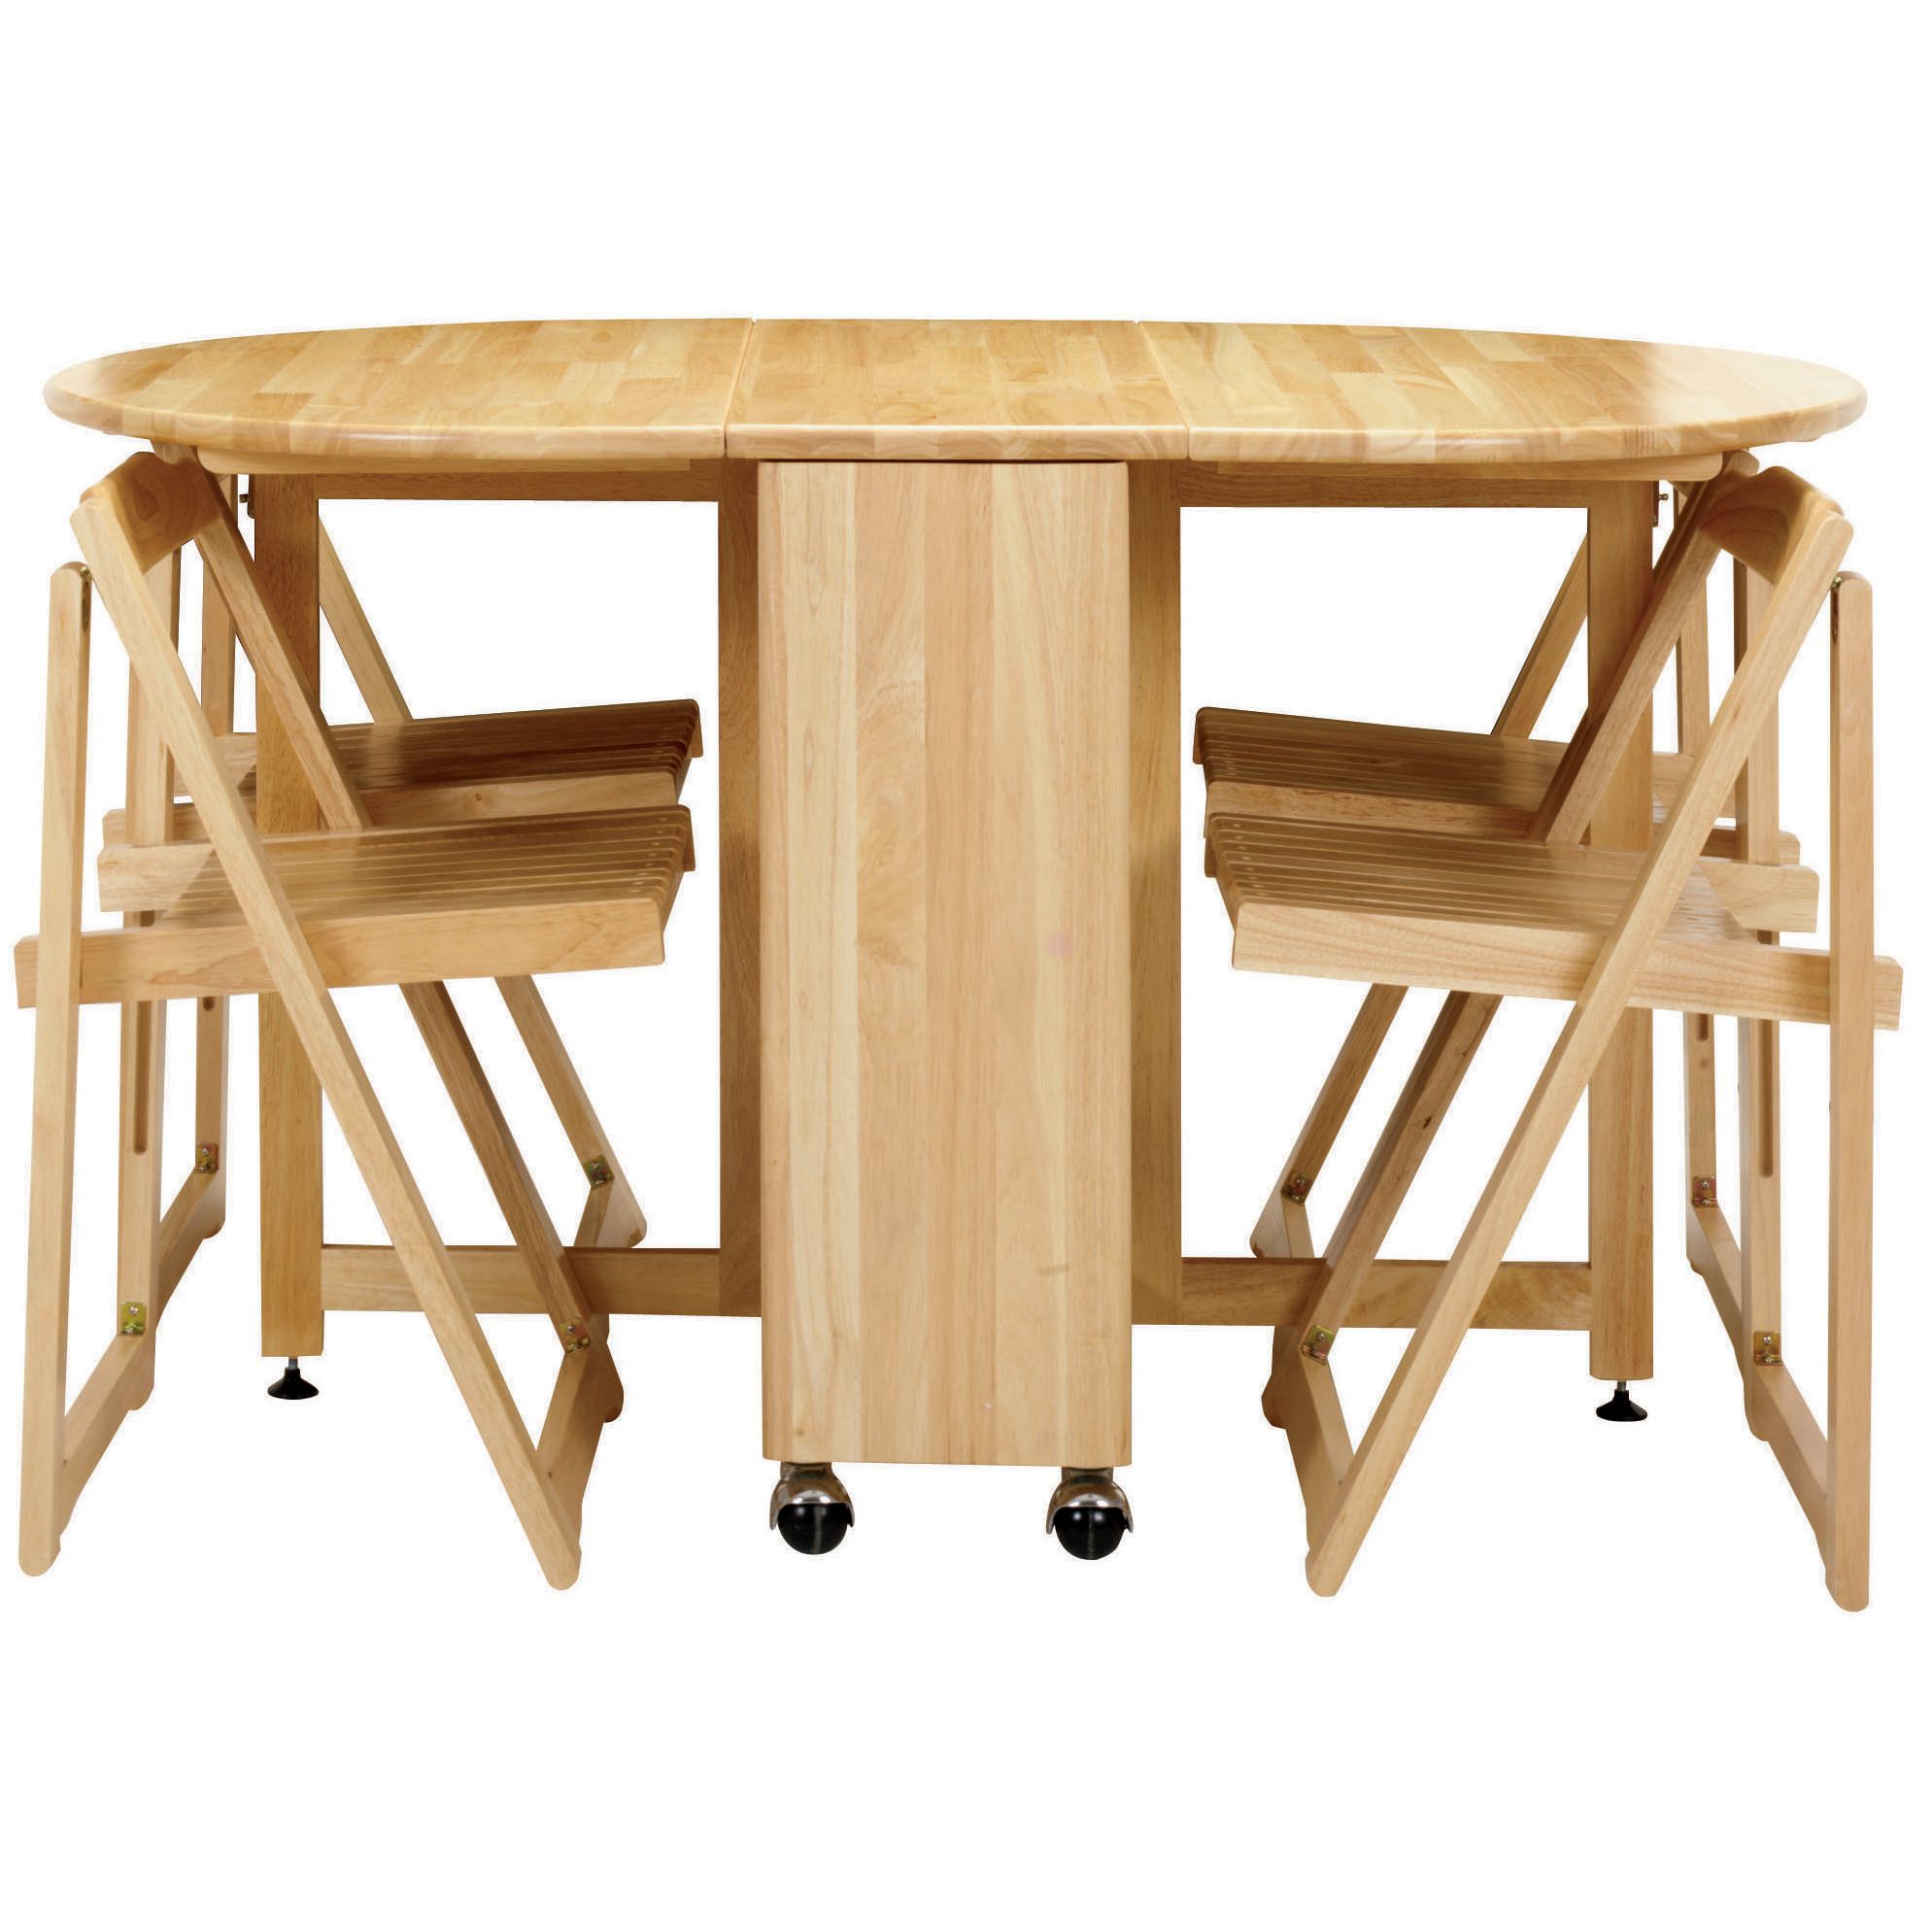 John Lewis Butterfly Folding Table and Four